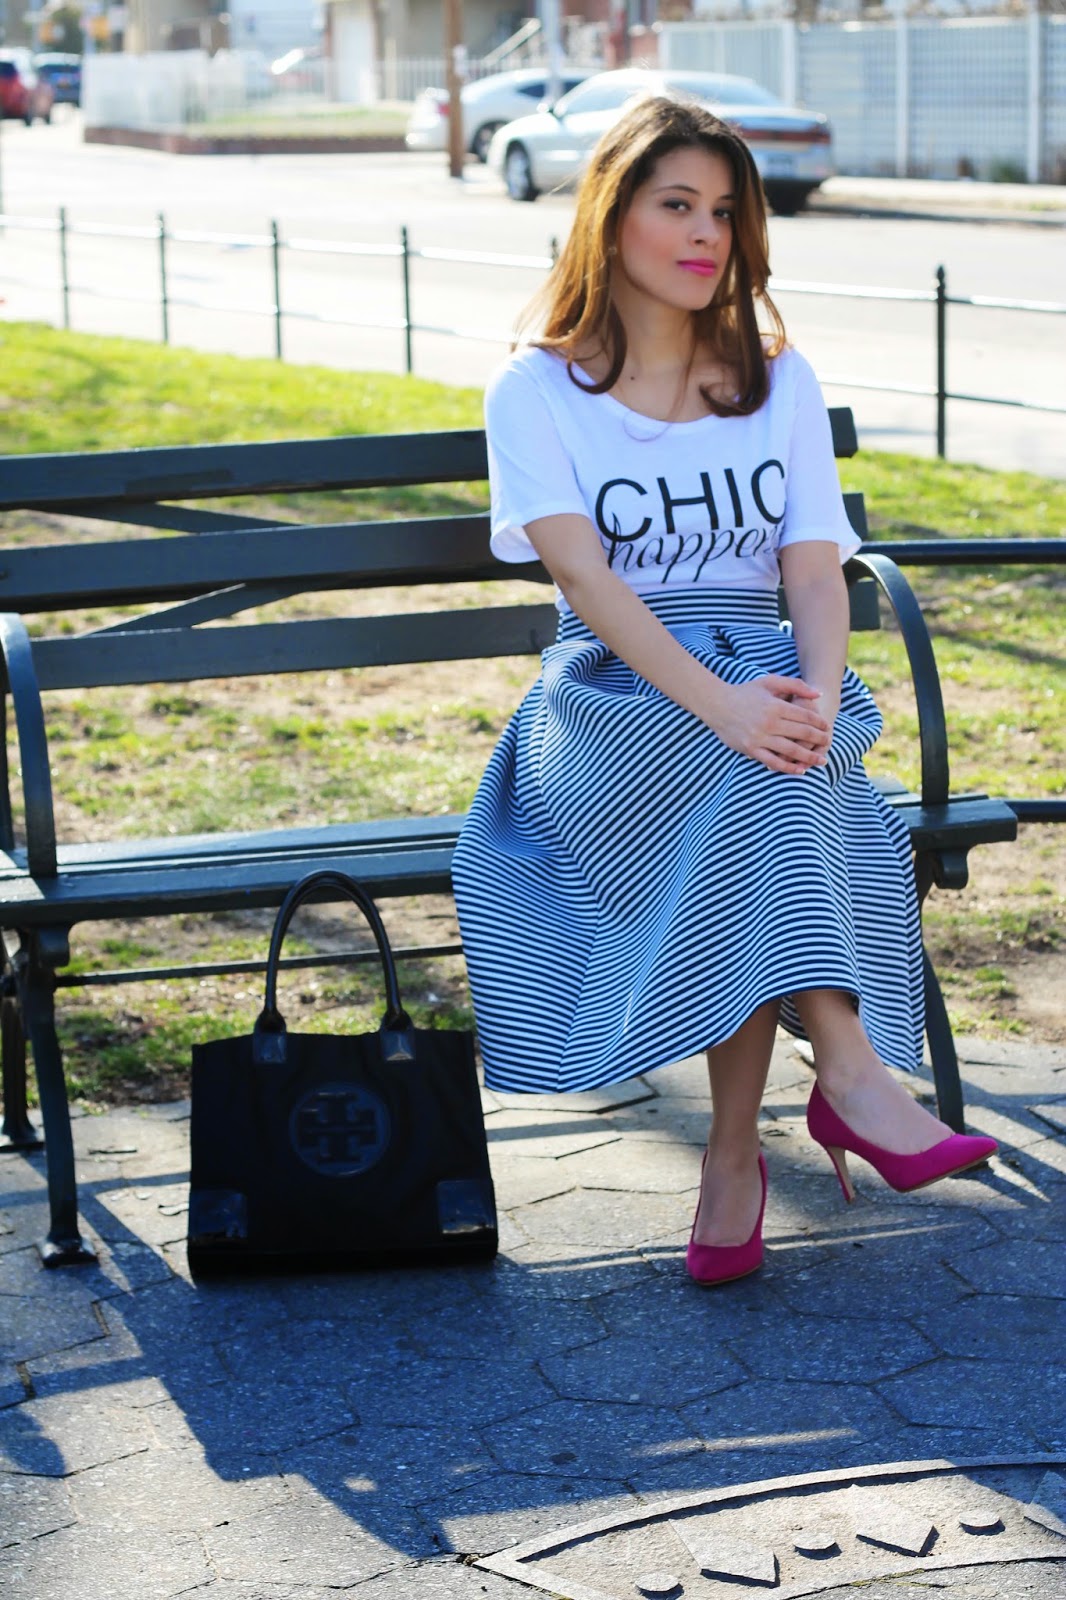 shirt club, chic, chichappens, midi skirt, skirt, tulip skirt, spring, spring fashion, chic seams, rosewood, roosewoodboutique, fuchsia, pumps, stripes, tory burch, old navy, pleated skirt, navy, white, fashion, ella nylon tote, tote, girl, girly, simple, beautiful, cool, blogger, personal style, fashion blogger, new york, baby blue